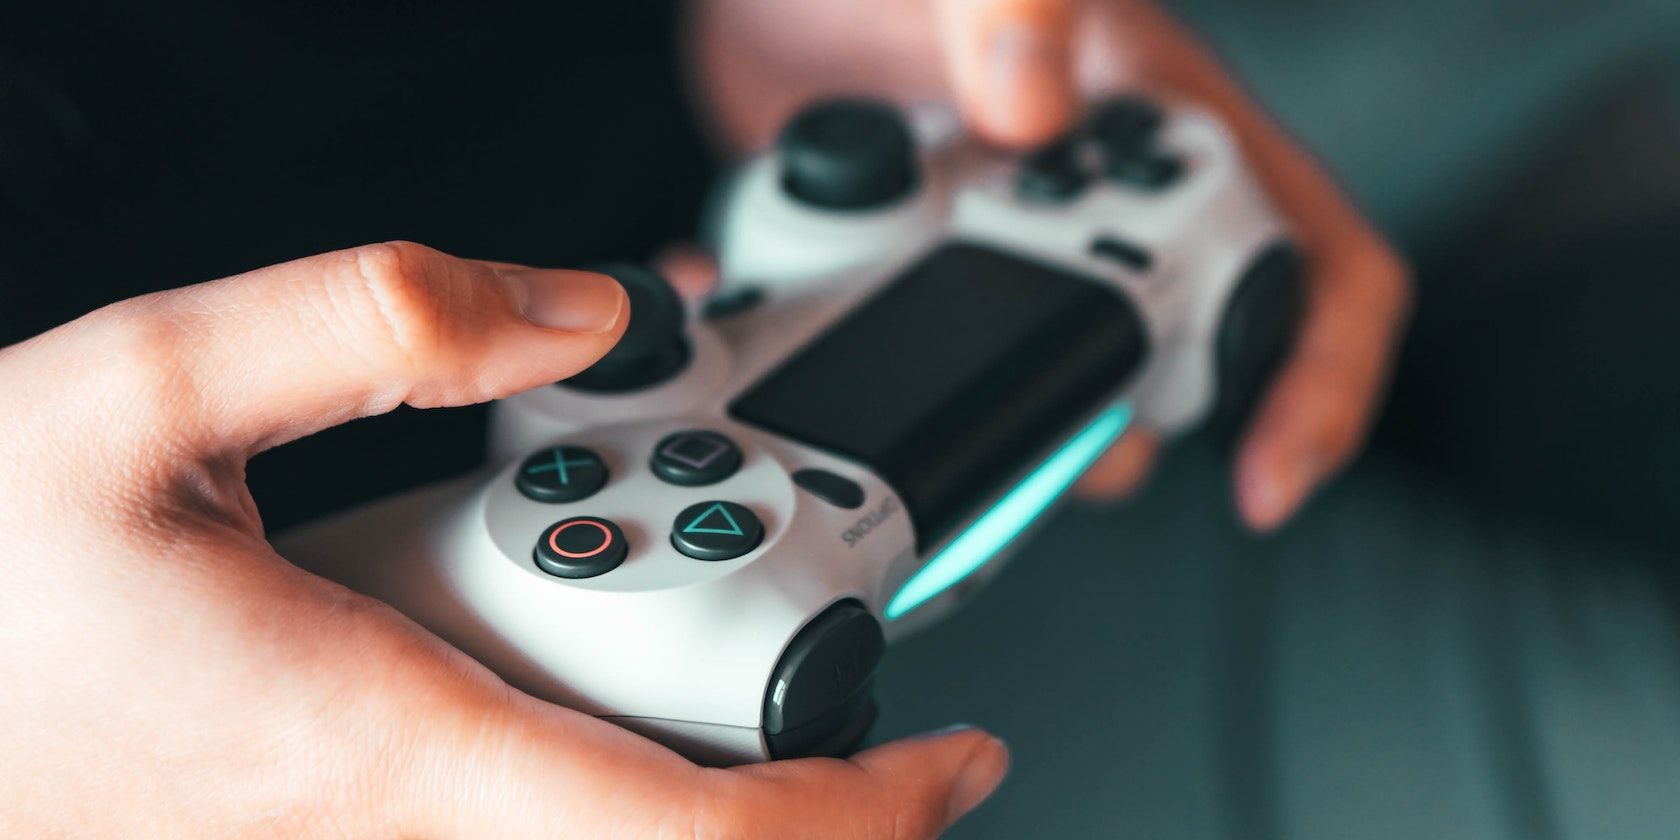 a person gaming with a white PS4 controller